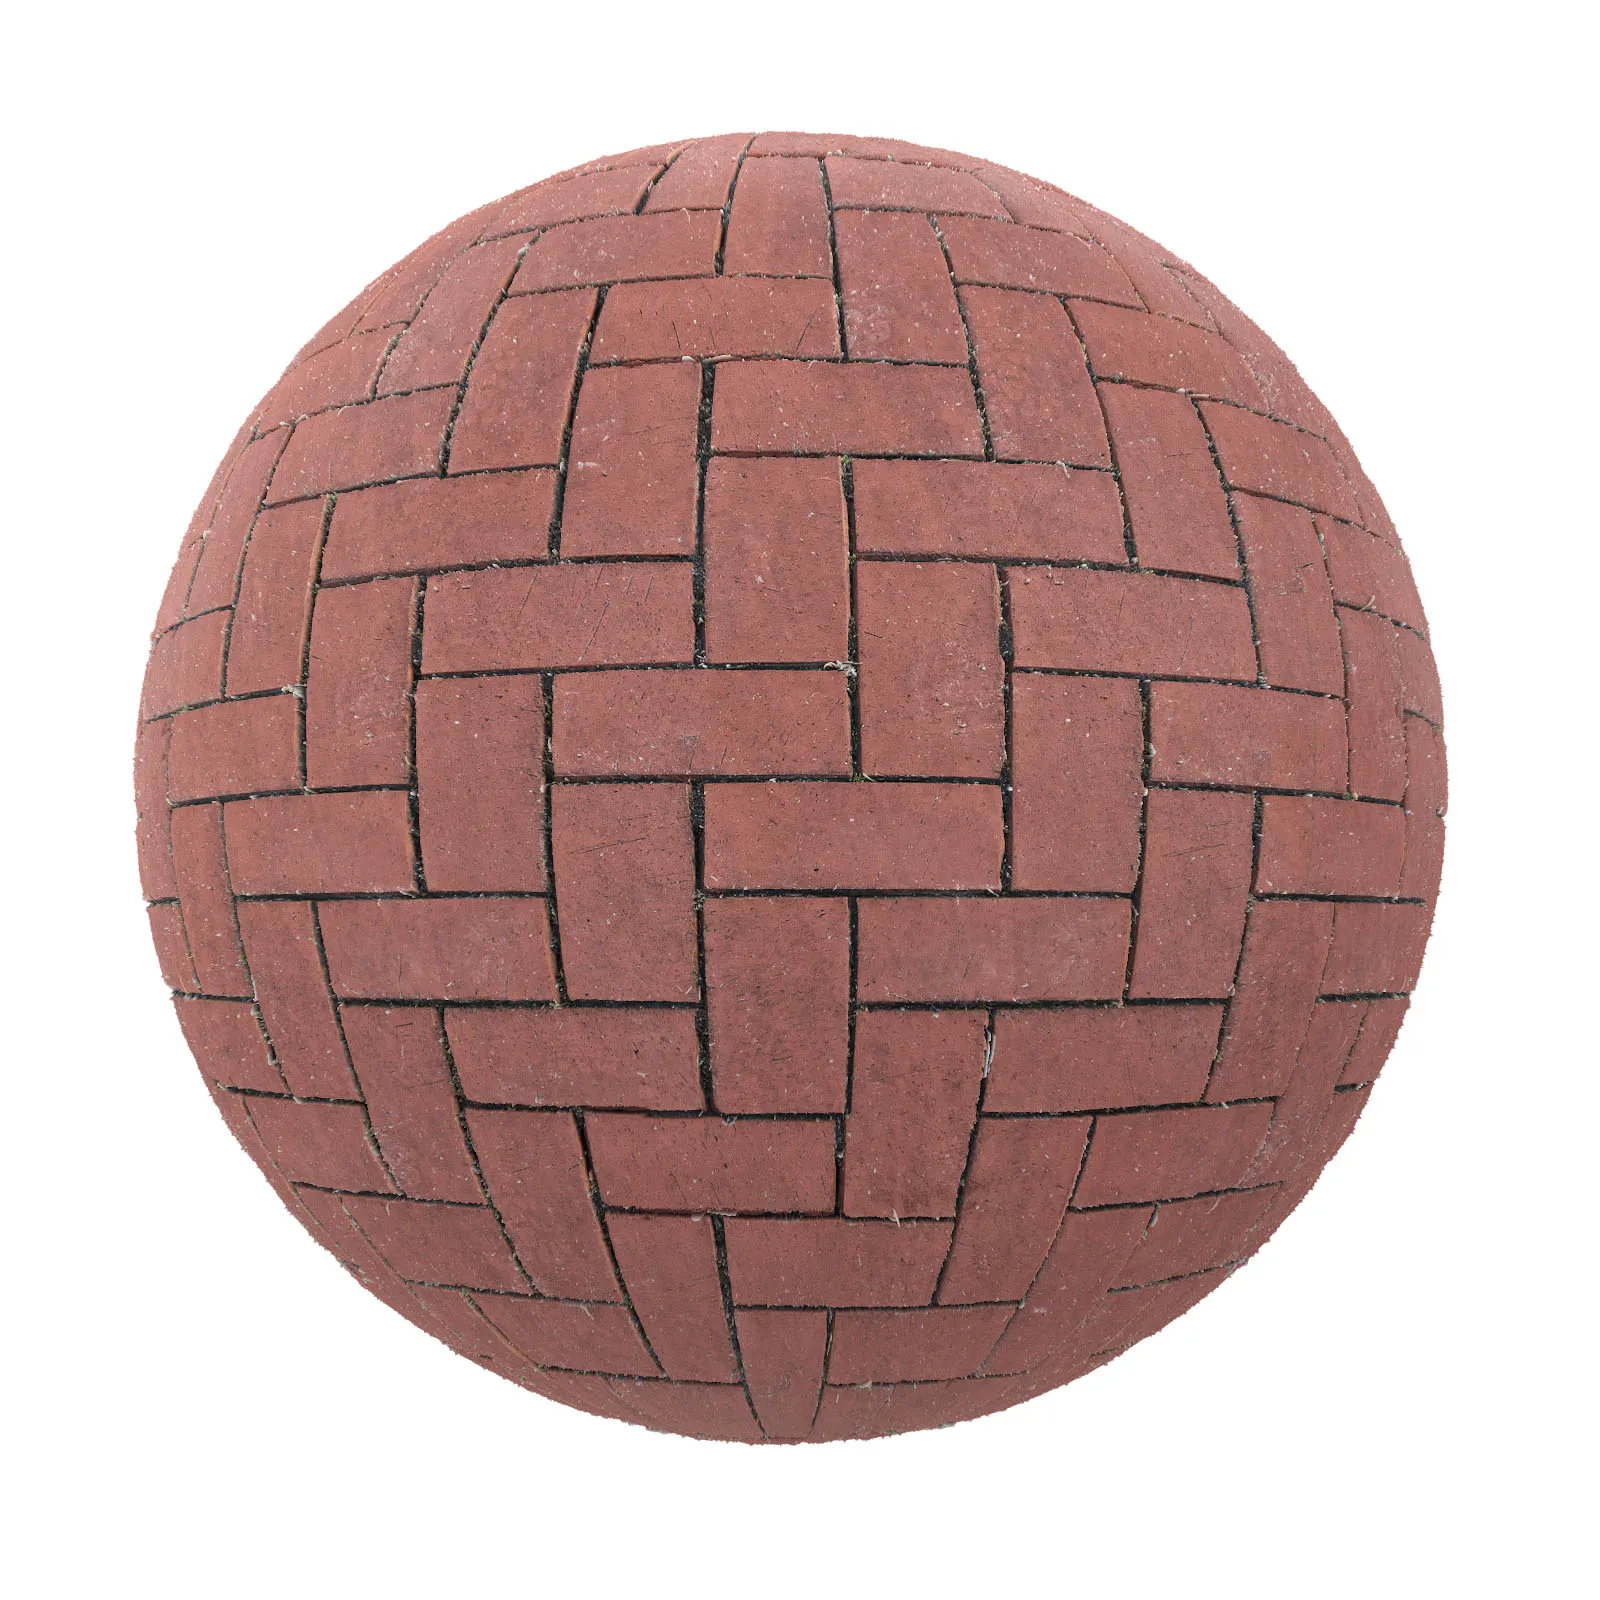 PBR CGAXIS TEXTURES – PAVEMENTS – Red Brick Pavement 7